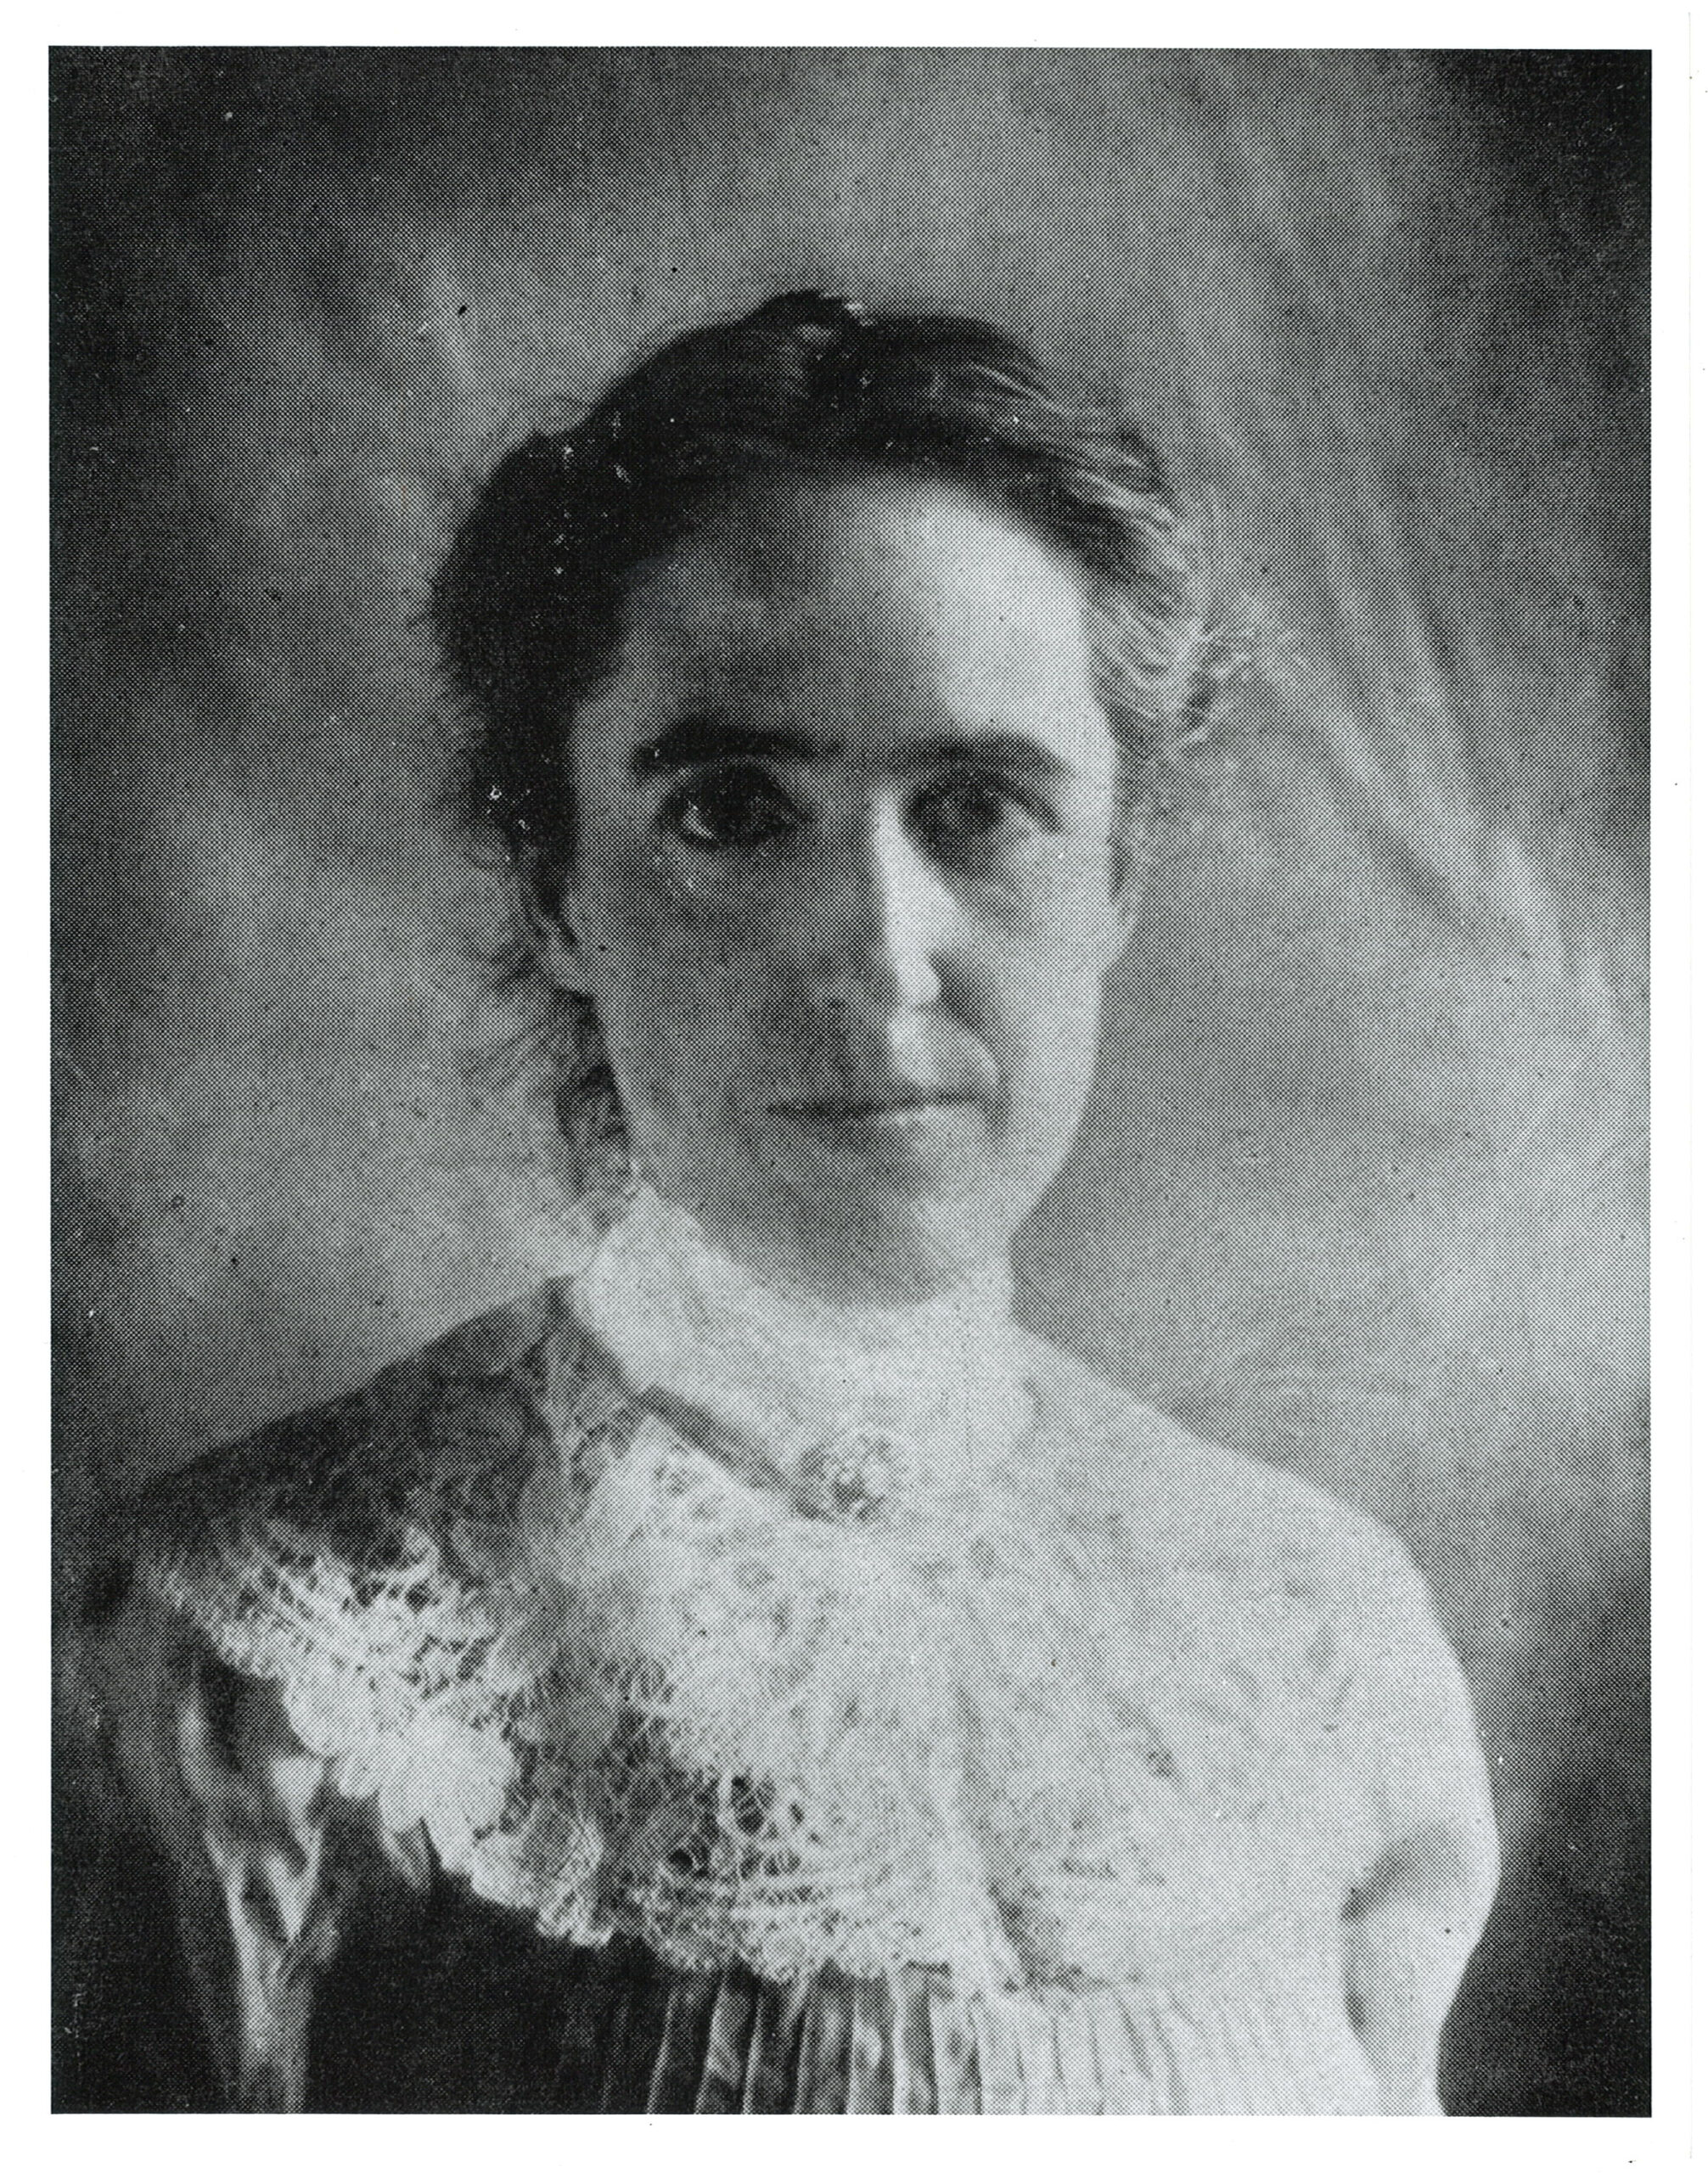 Head-and-shoulders black and white photograph of Henrietta Leavitt, age approximately 30 years old.